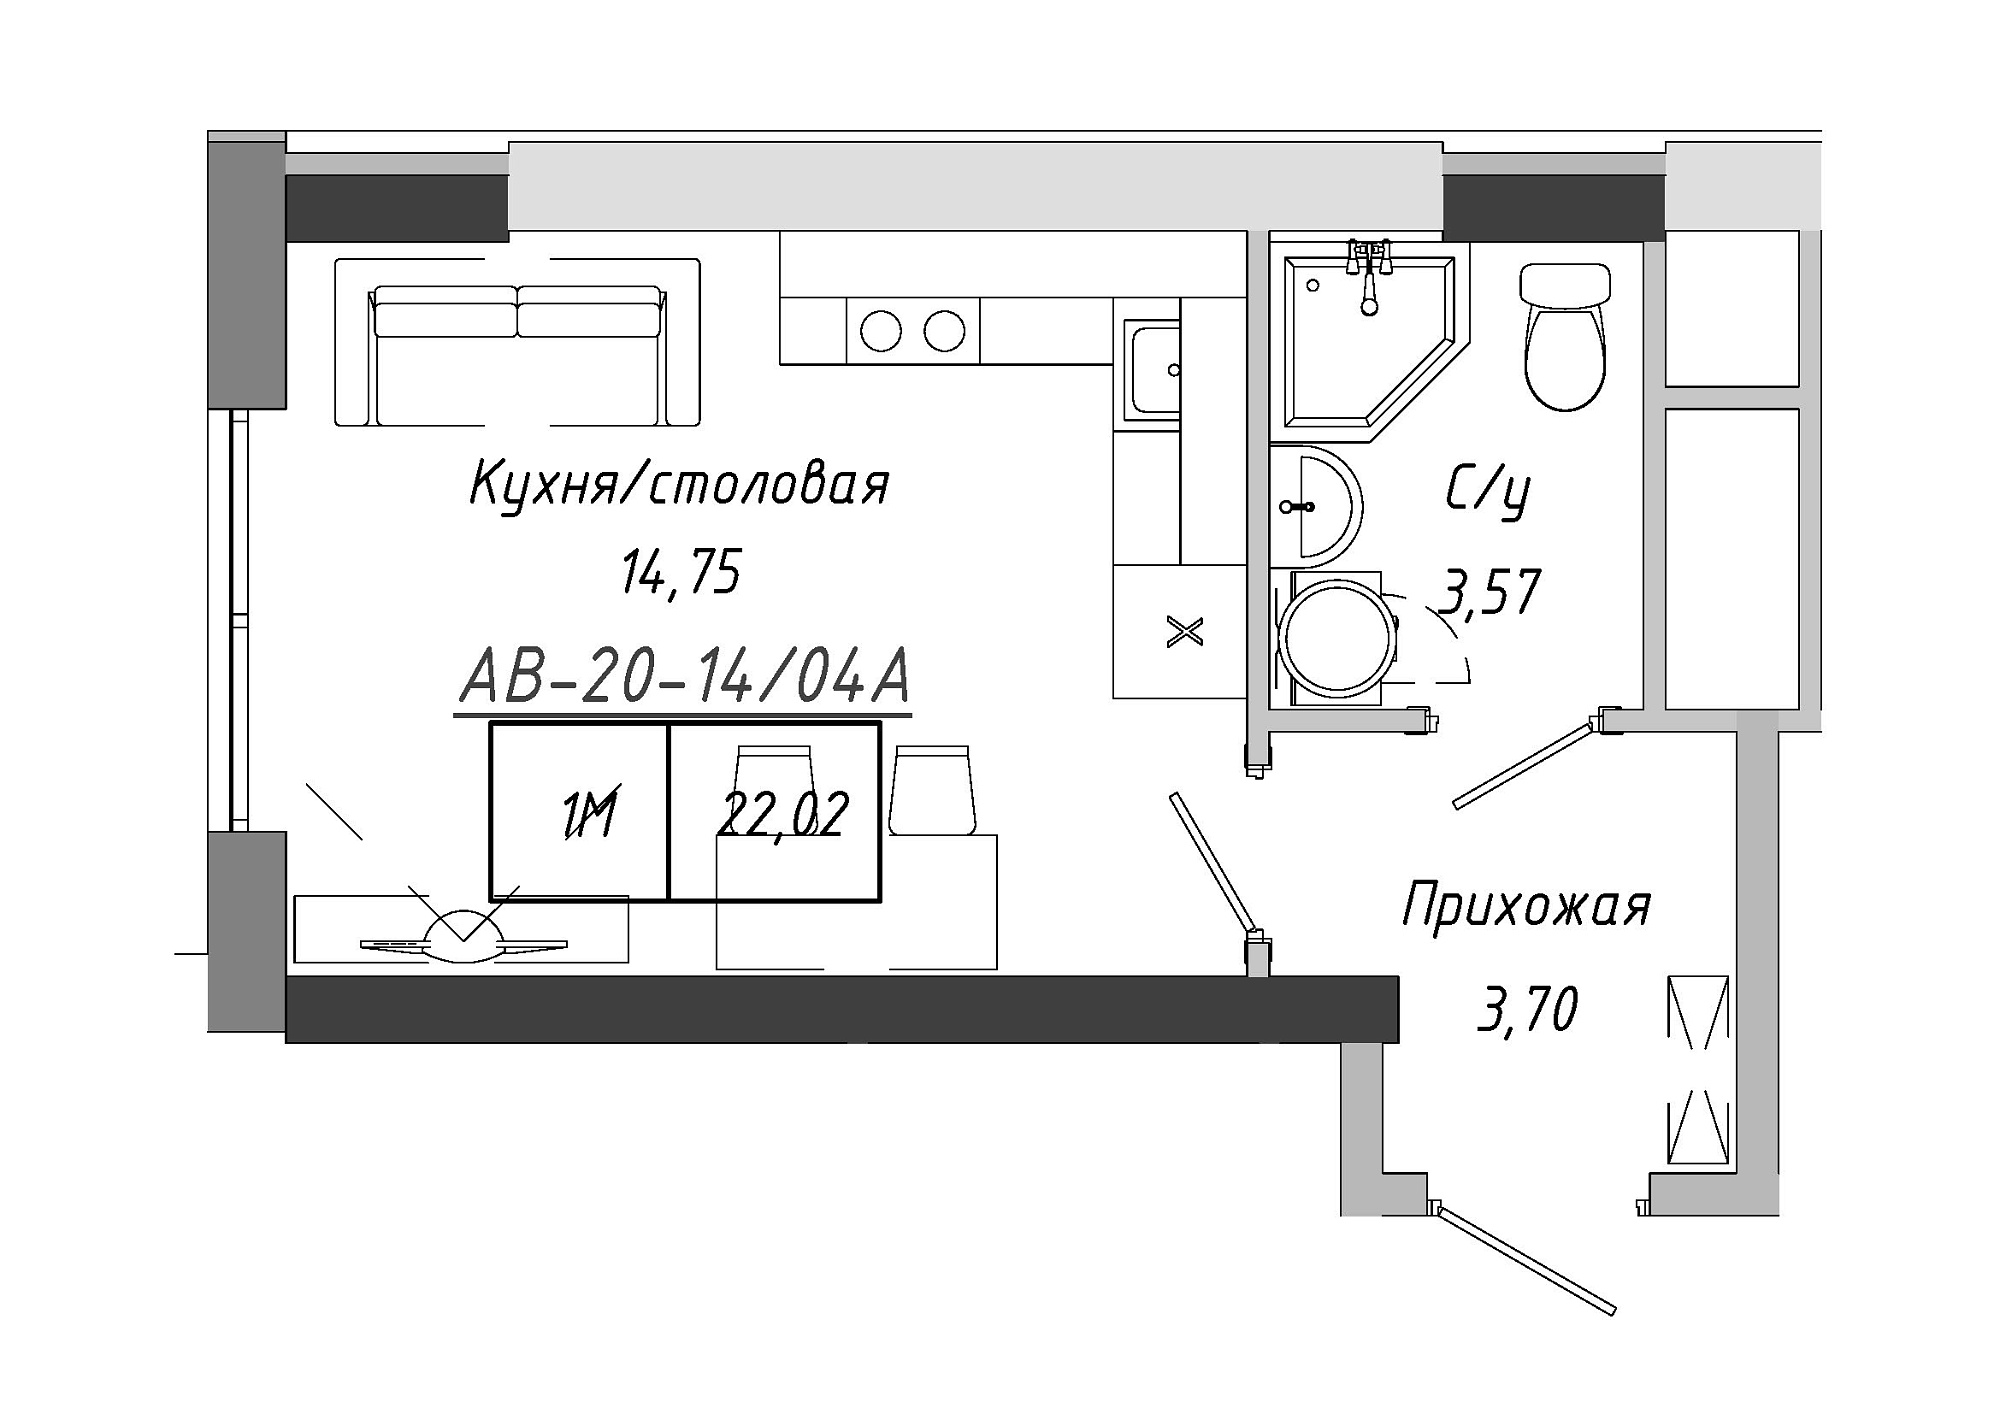 Planning Smart flats area 22.02m2, AB-20-14/0104a.